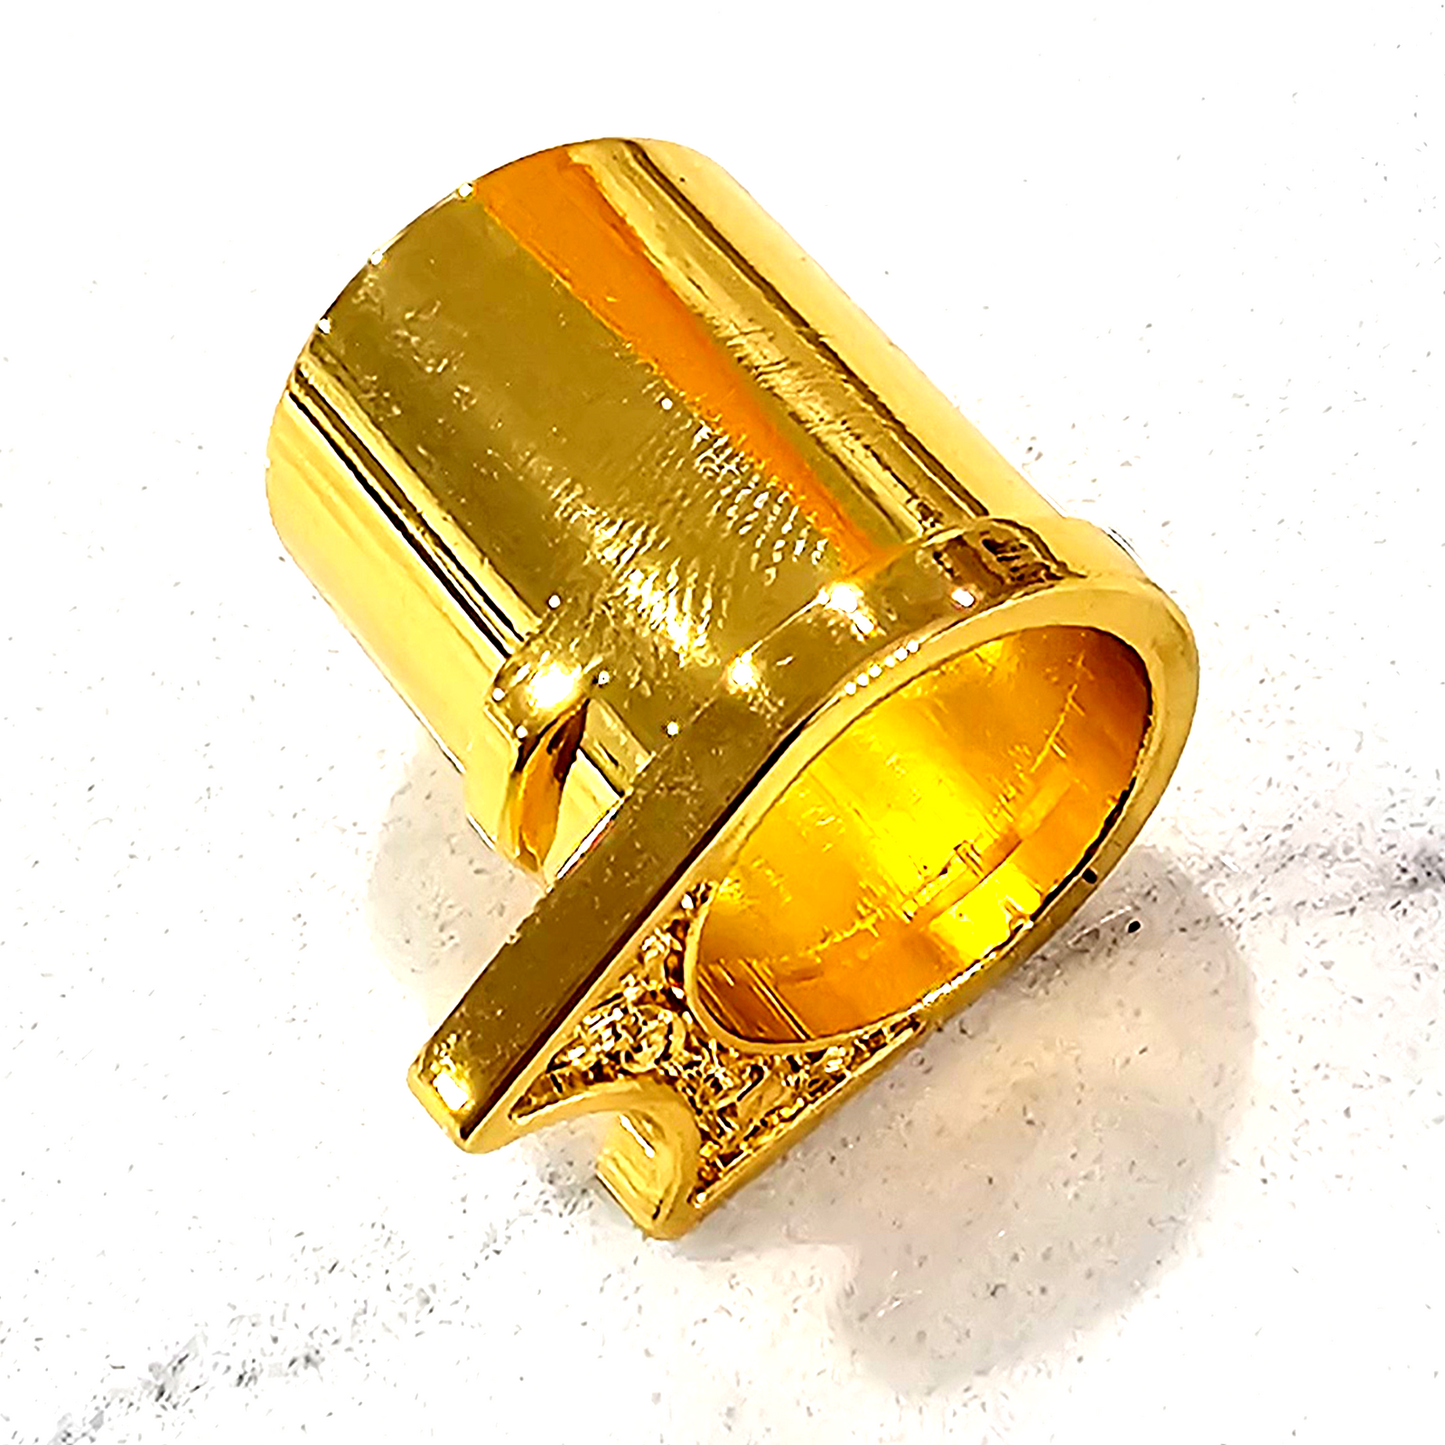 Engraved 1911 Mainspring, Grip Safety, Barrel Bushing, Recoil Spring Plug fit All 45ACP 9mm 1911s 24K Gold Plated